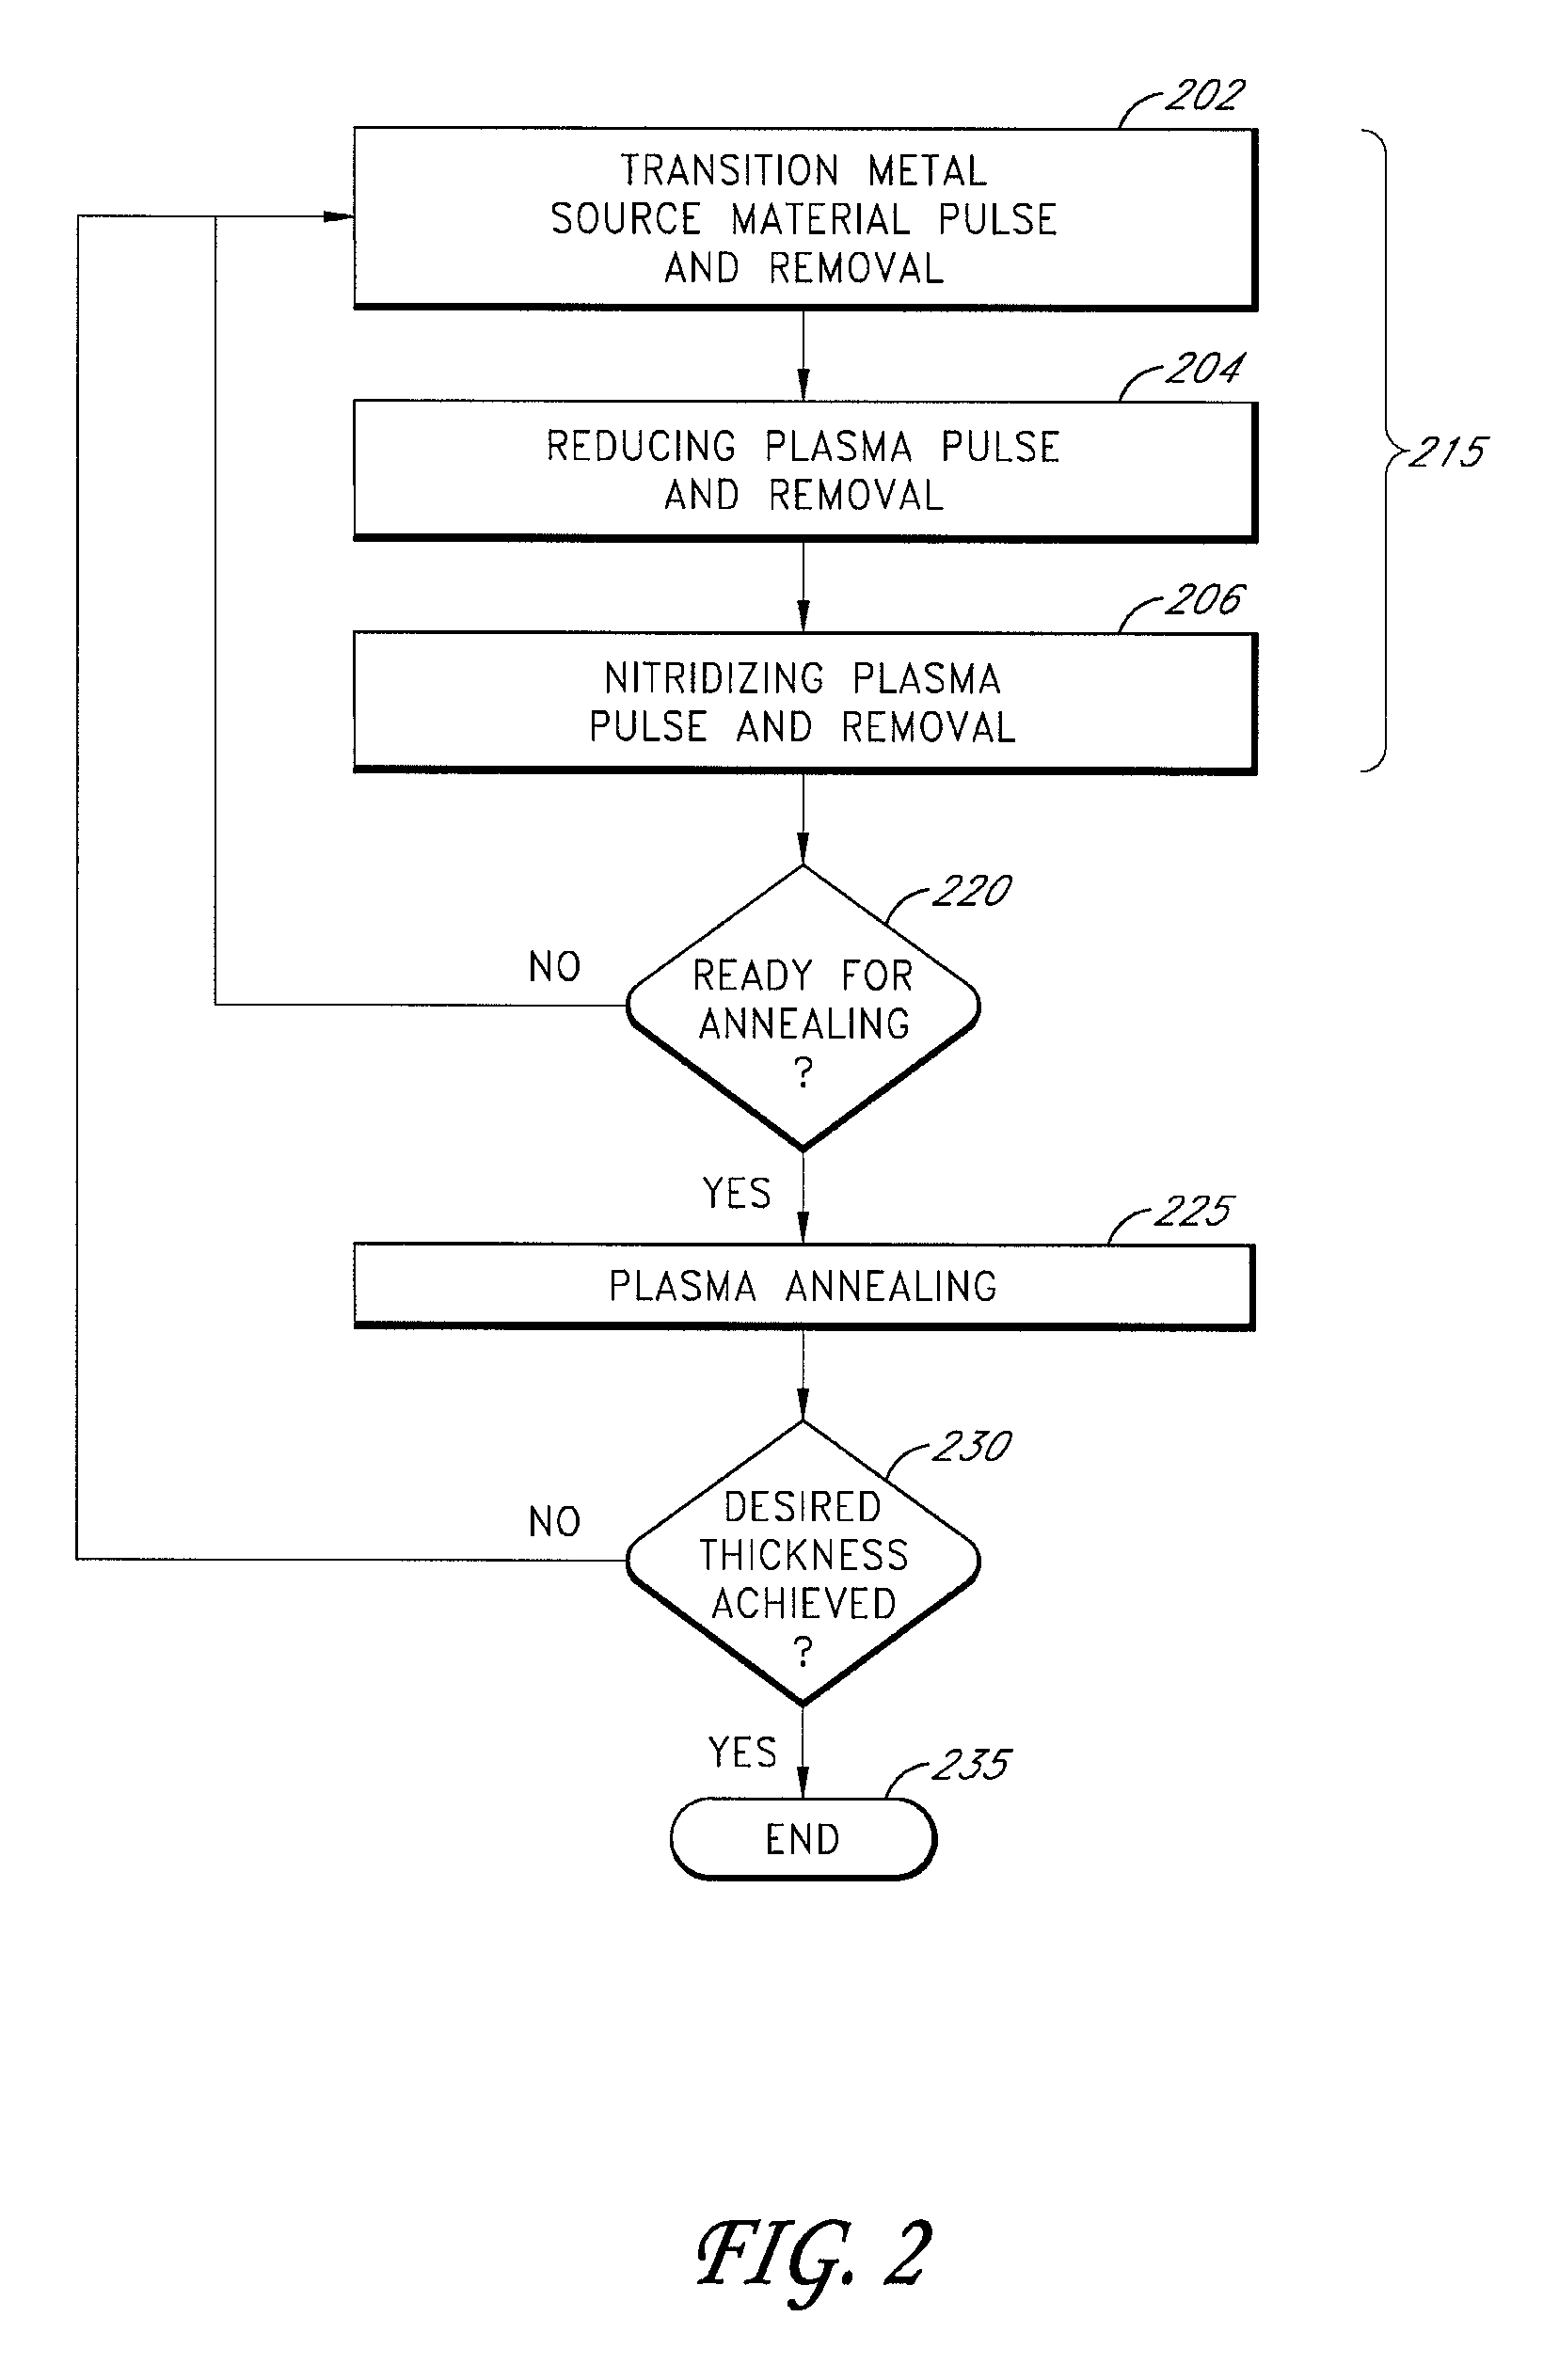 Periodic plasma annealing in an ALD-type process